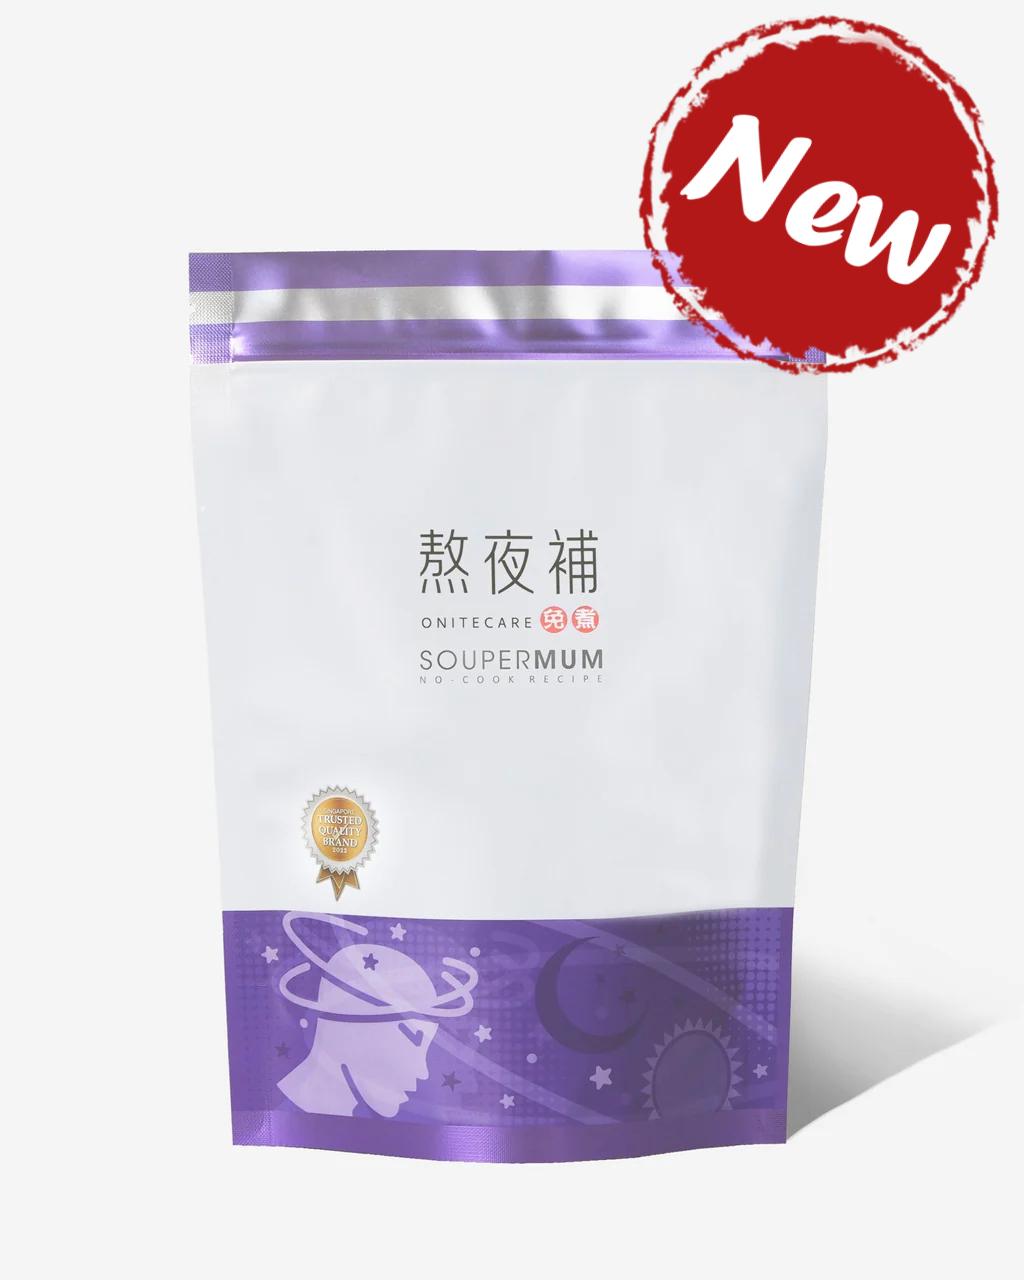 SOUPERMUM ONITECARE 熬夜补- NEW LAUNCHED